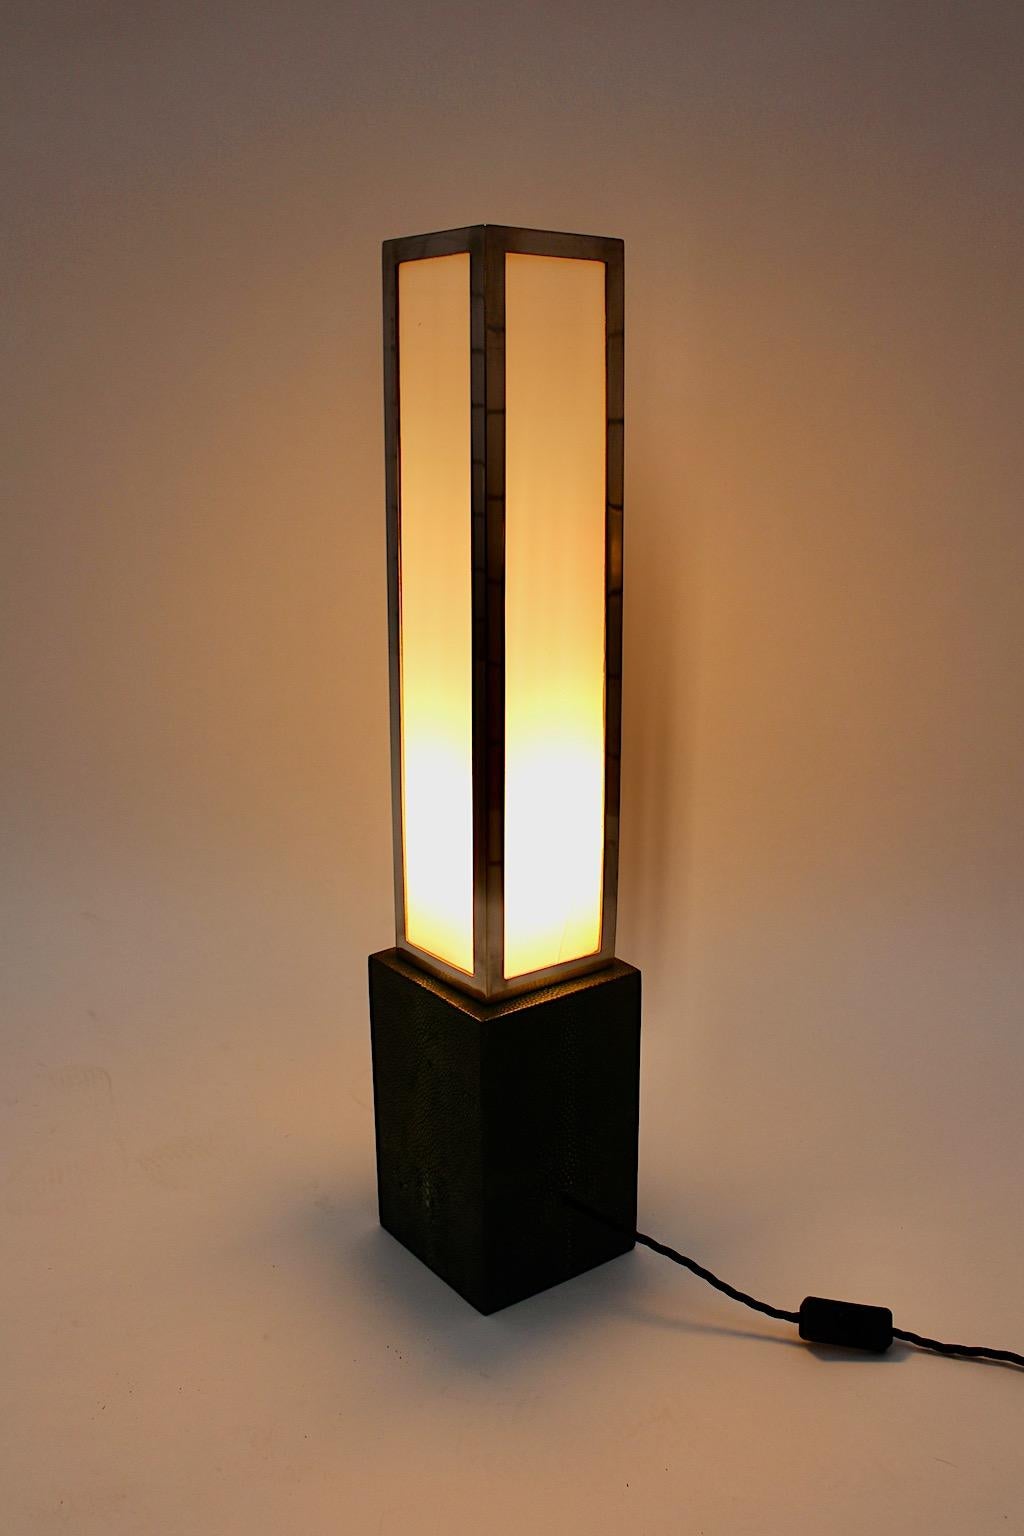 Art Deco Vintage Geometric Table Lamp Style Eckart Muthesius 1920s Germany For Sale 8